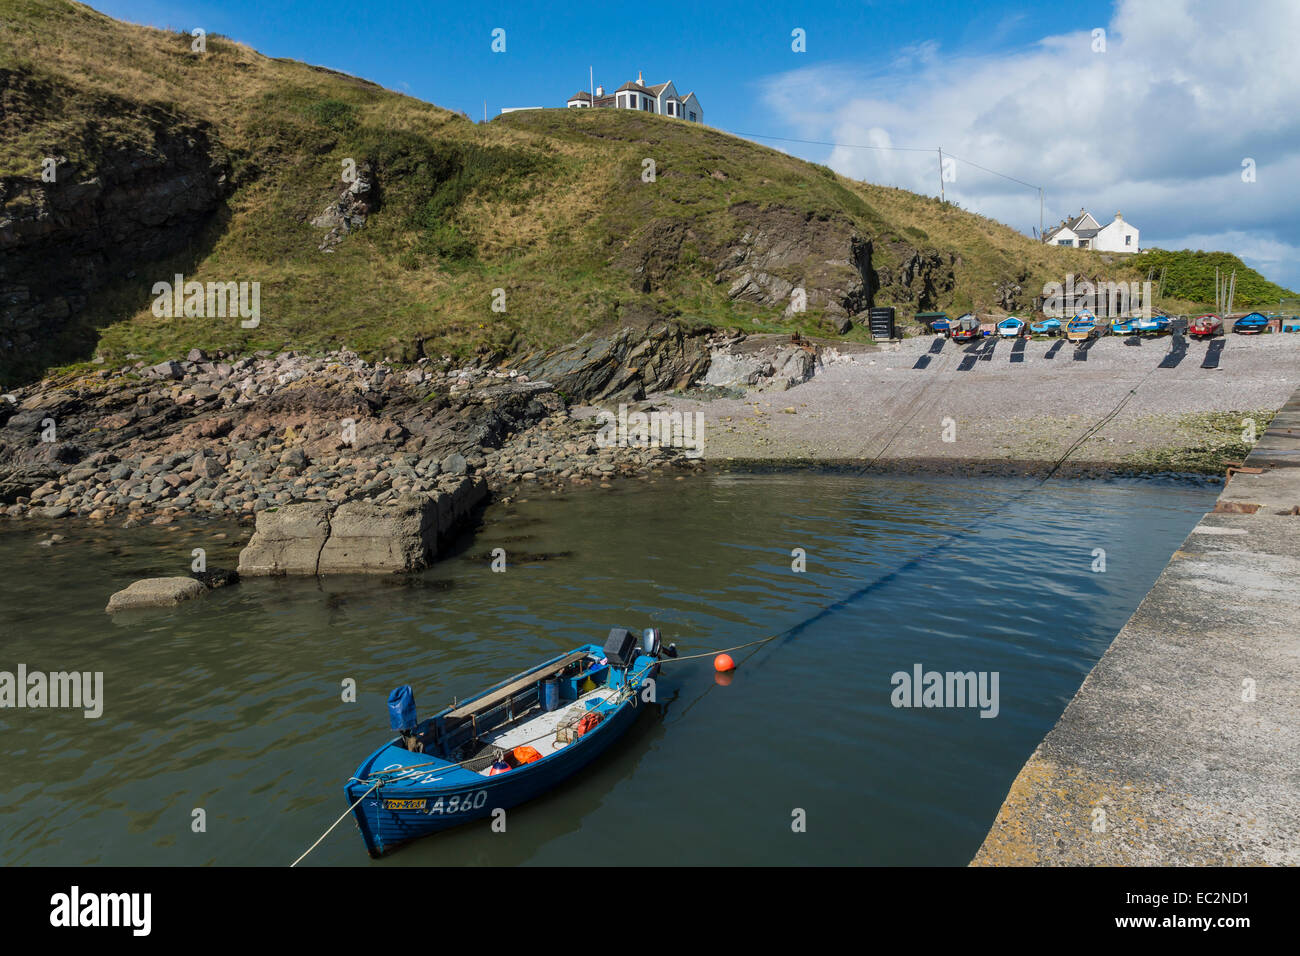 Cove harbour and blue fishing boat. Stock Photo